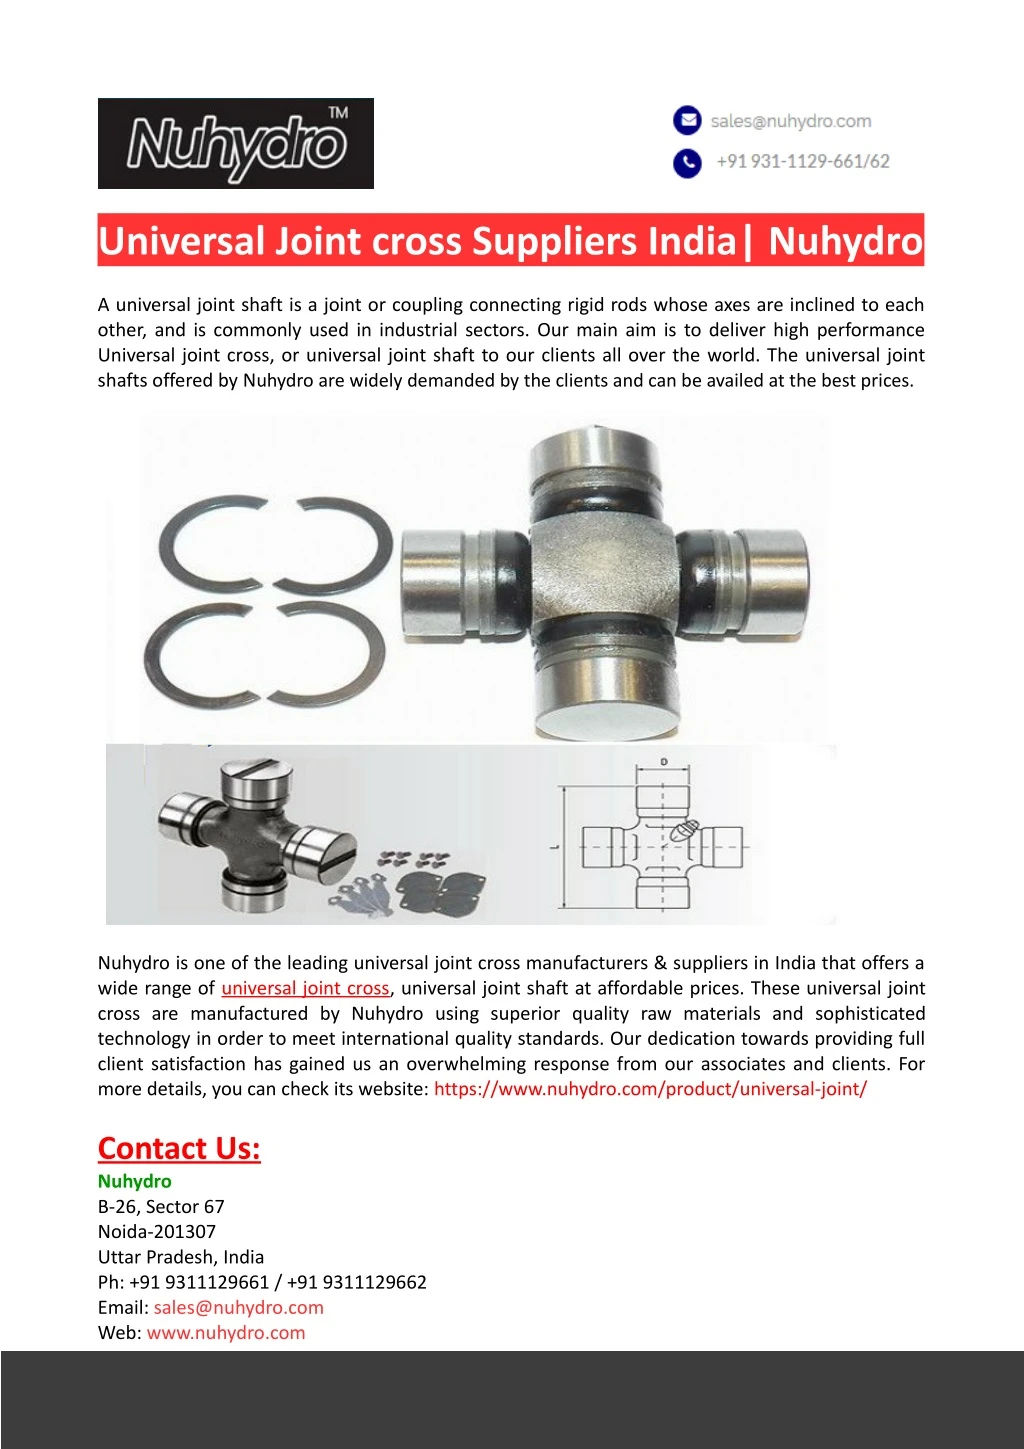 universal joint cross suppliers india nuhydro